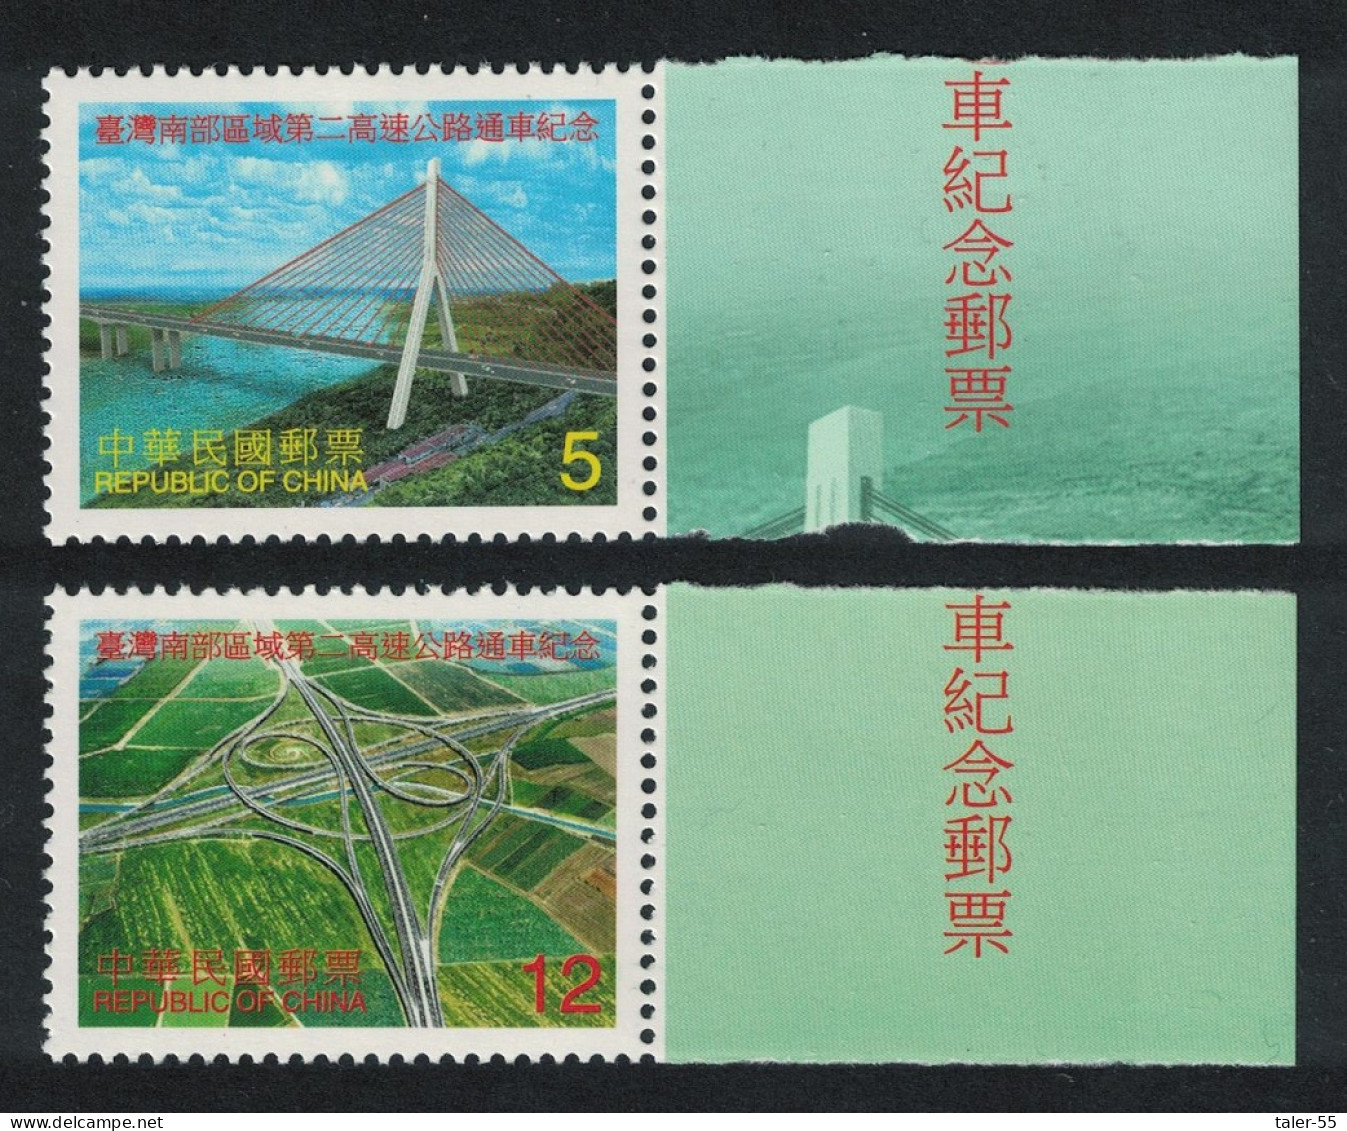 Taiwan Second Southern Freeway 2v Margins 2000 MNH SG#2620-2621 - Unused Stamps